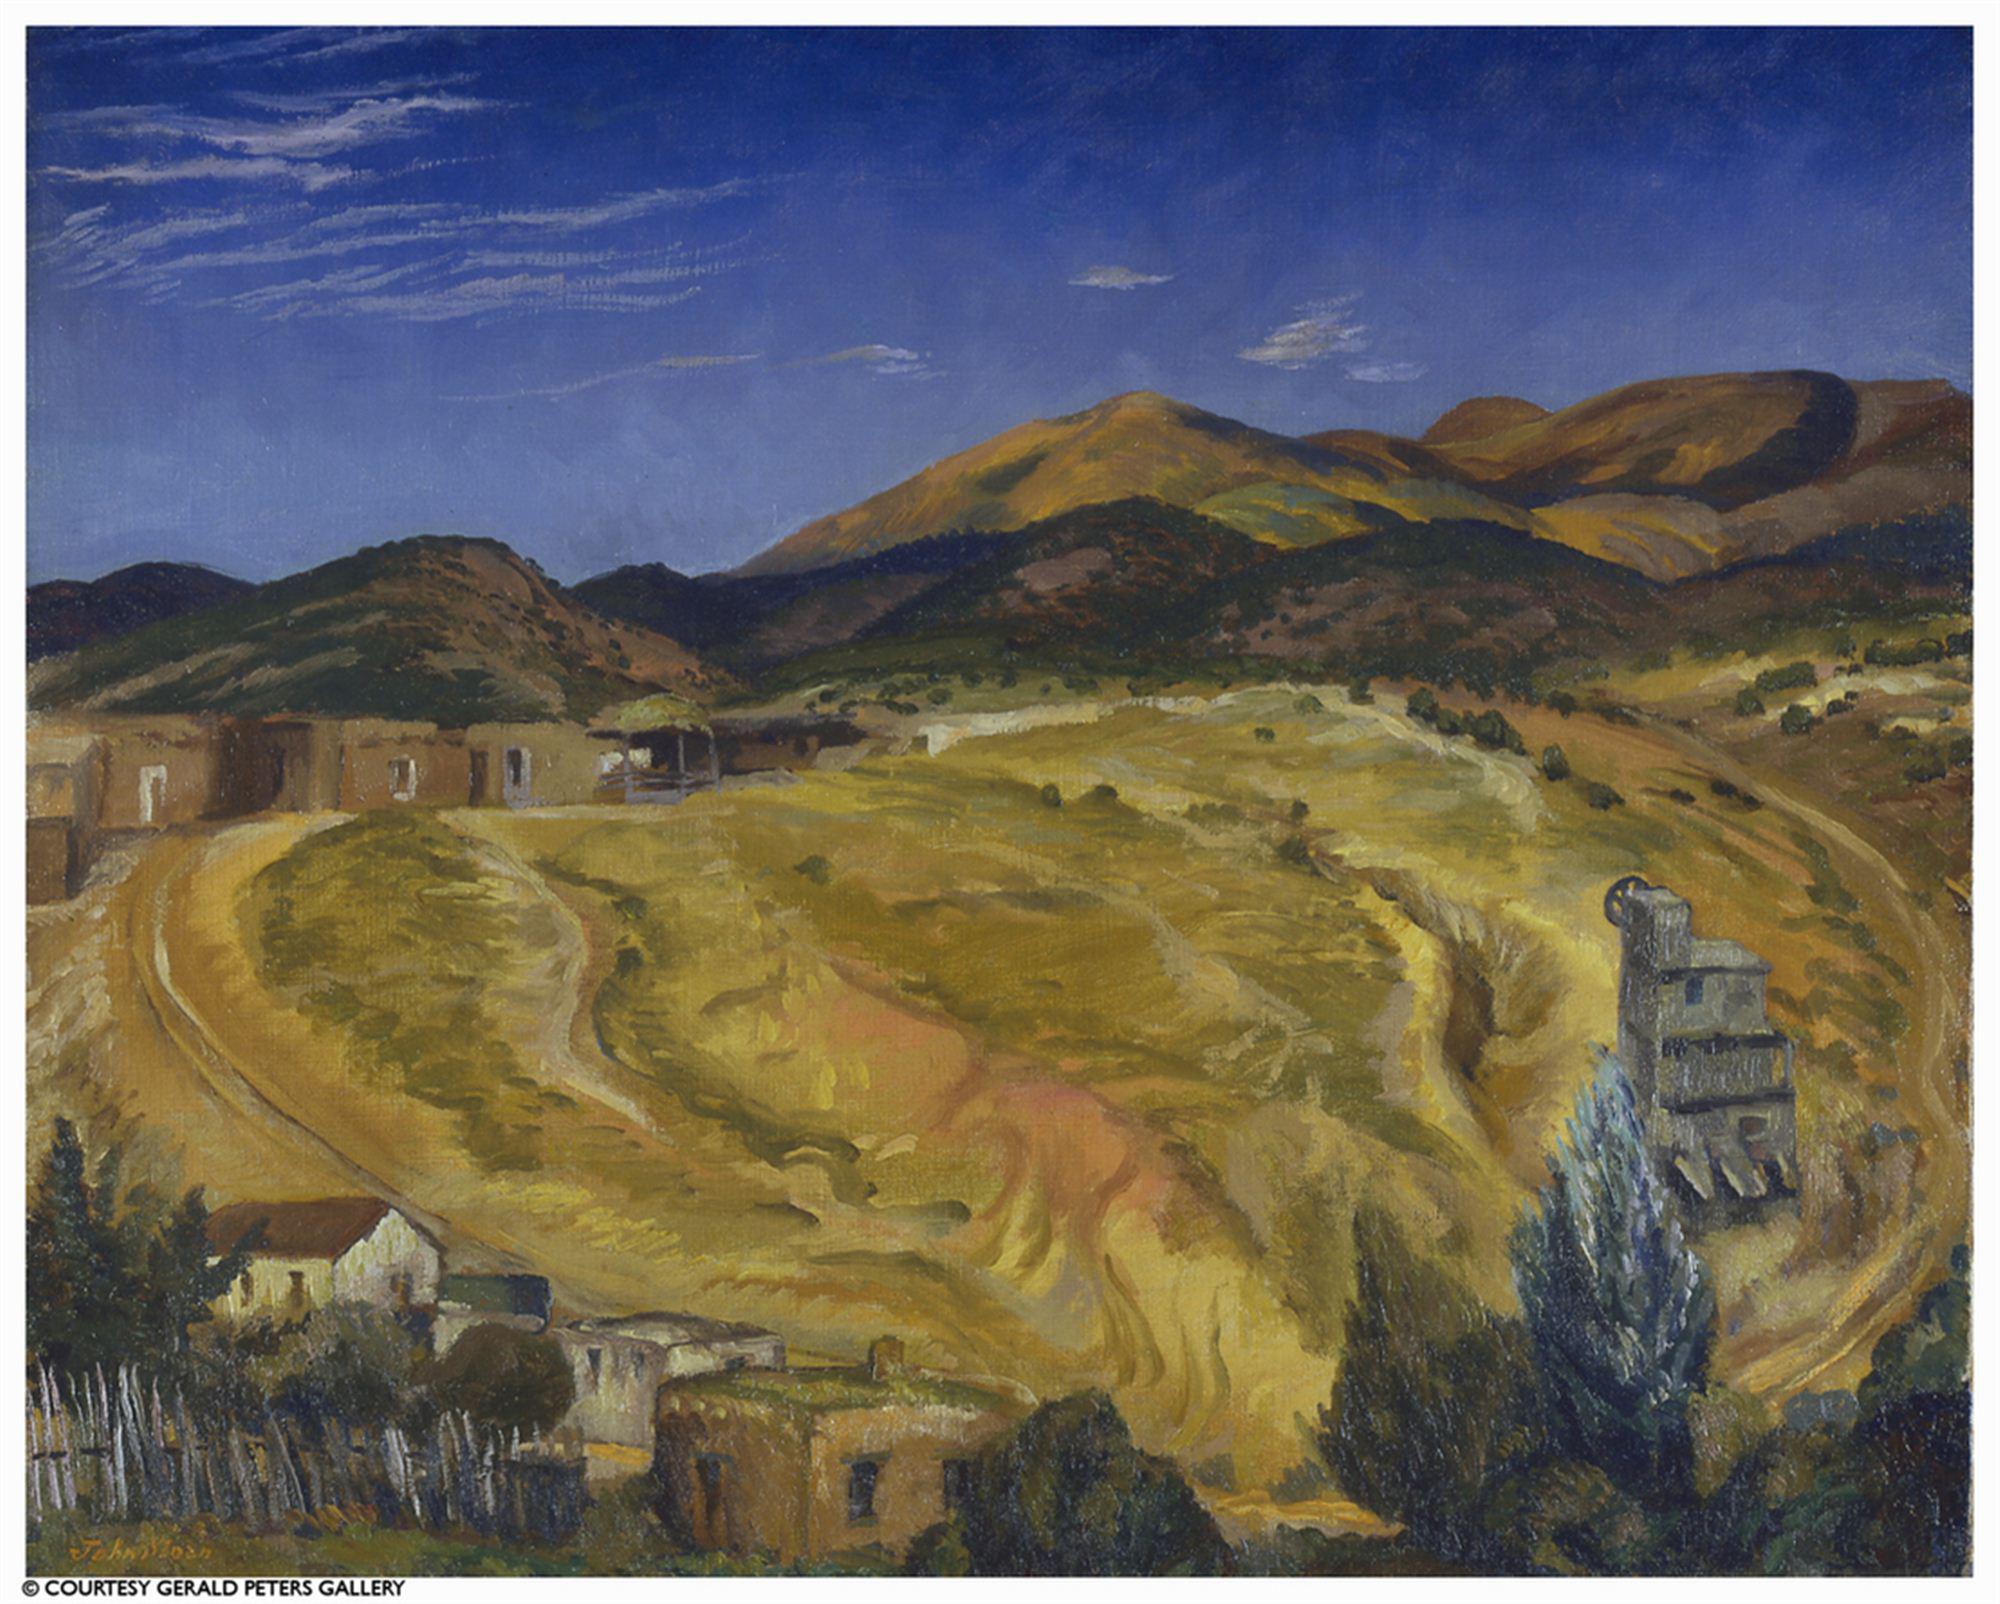 

											</b>

											<em>
												Lure of the West: Celebrating 50 Years of Gerald Peters Gallery  </em> 

											<h4>
												New York: April 29 - May 27, 2022      Santa Fe: June 24 - July 23, 2022											</h4>

		                																																													<i>John Sloan, Autumn, Sun on the Range,</i>  
																																								1920, 
																																								oil on canvas, 
																																								26 x 32 inches 
																								
		                				